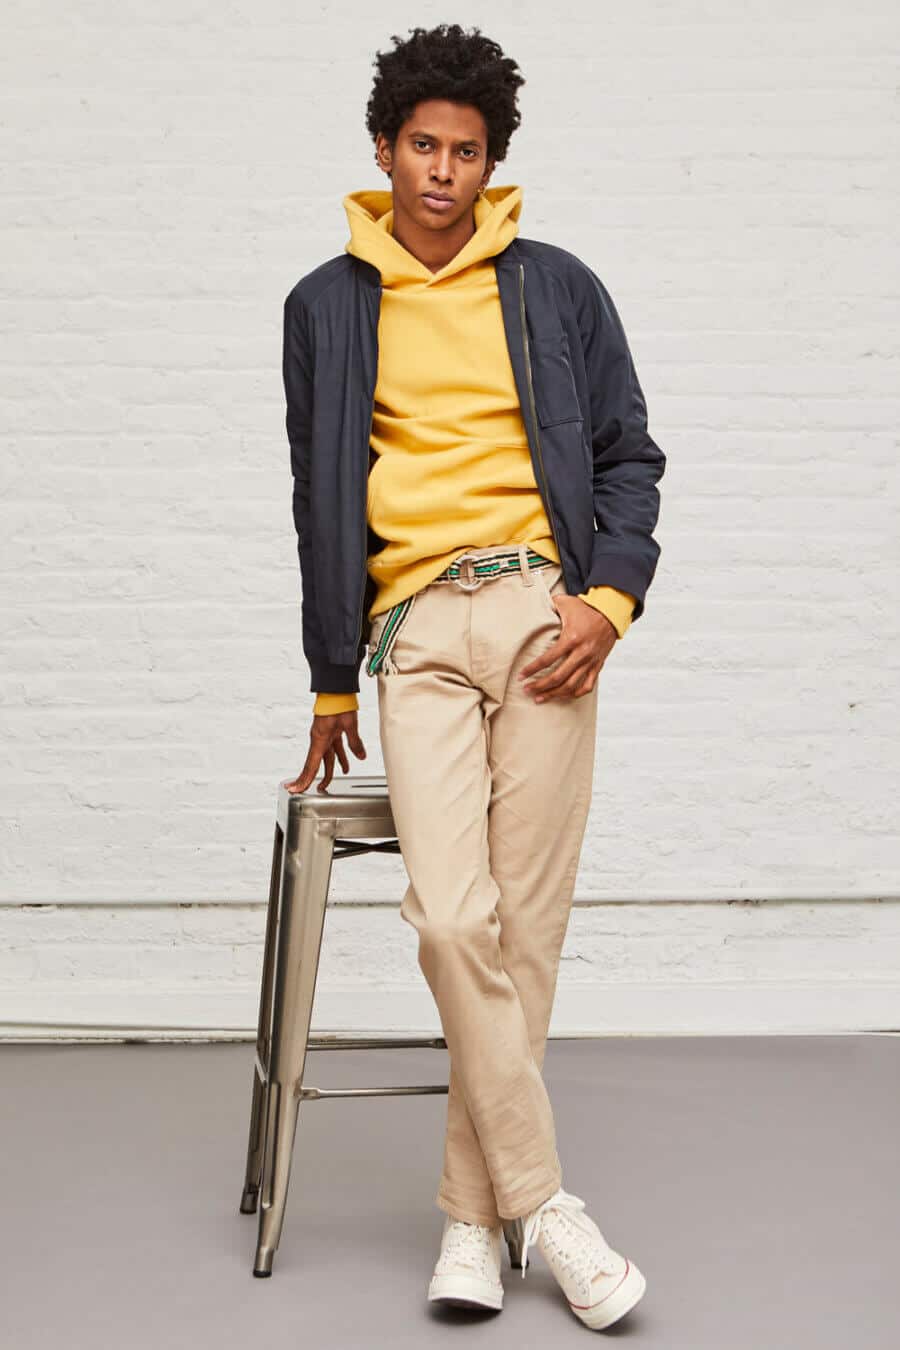 Men's khaki chinos worn with a yellow hoodie and navy bomber jacket outfit